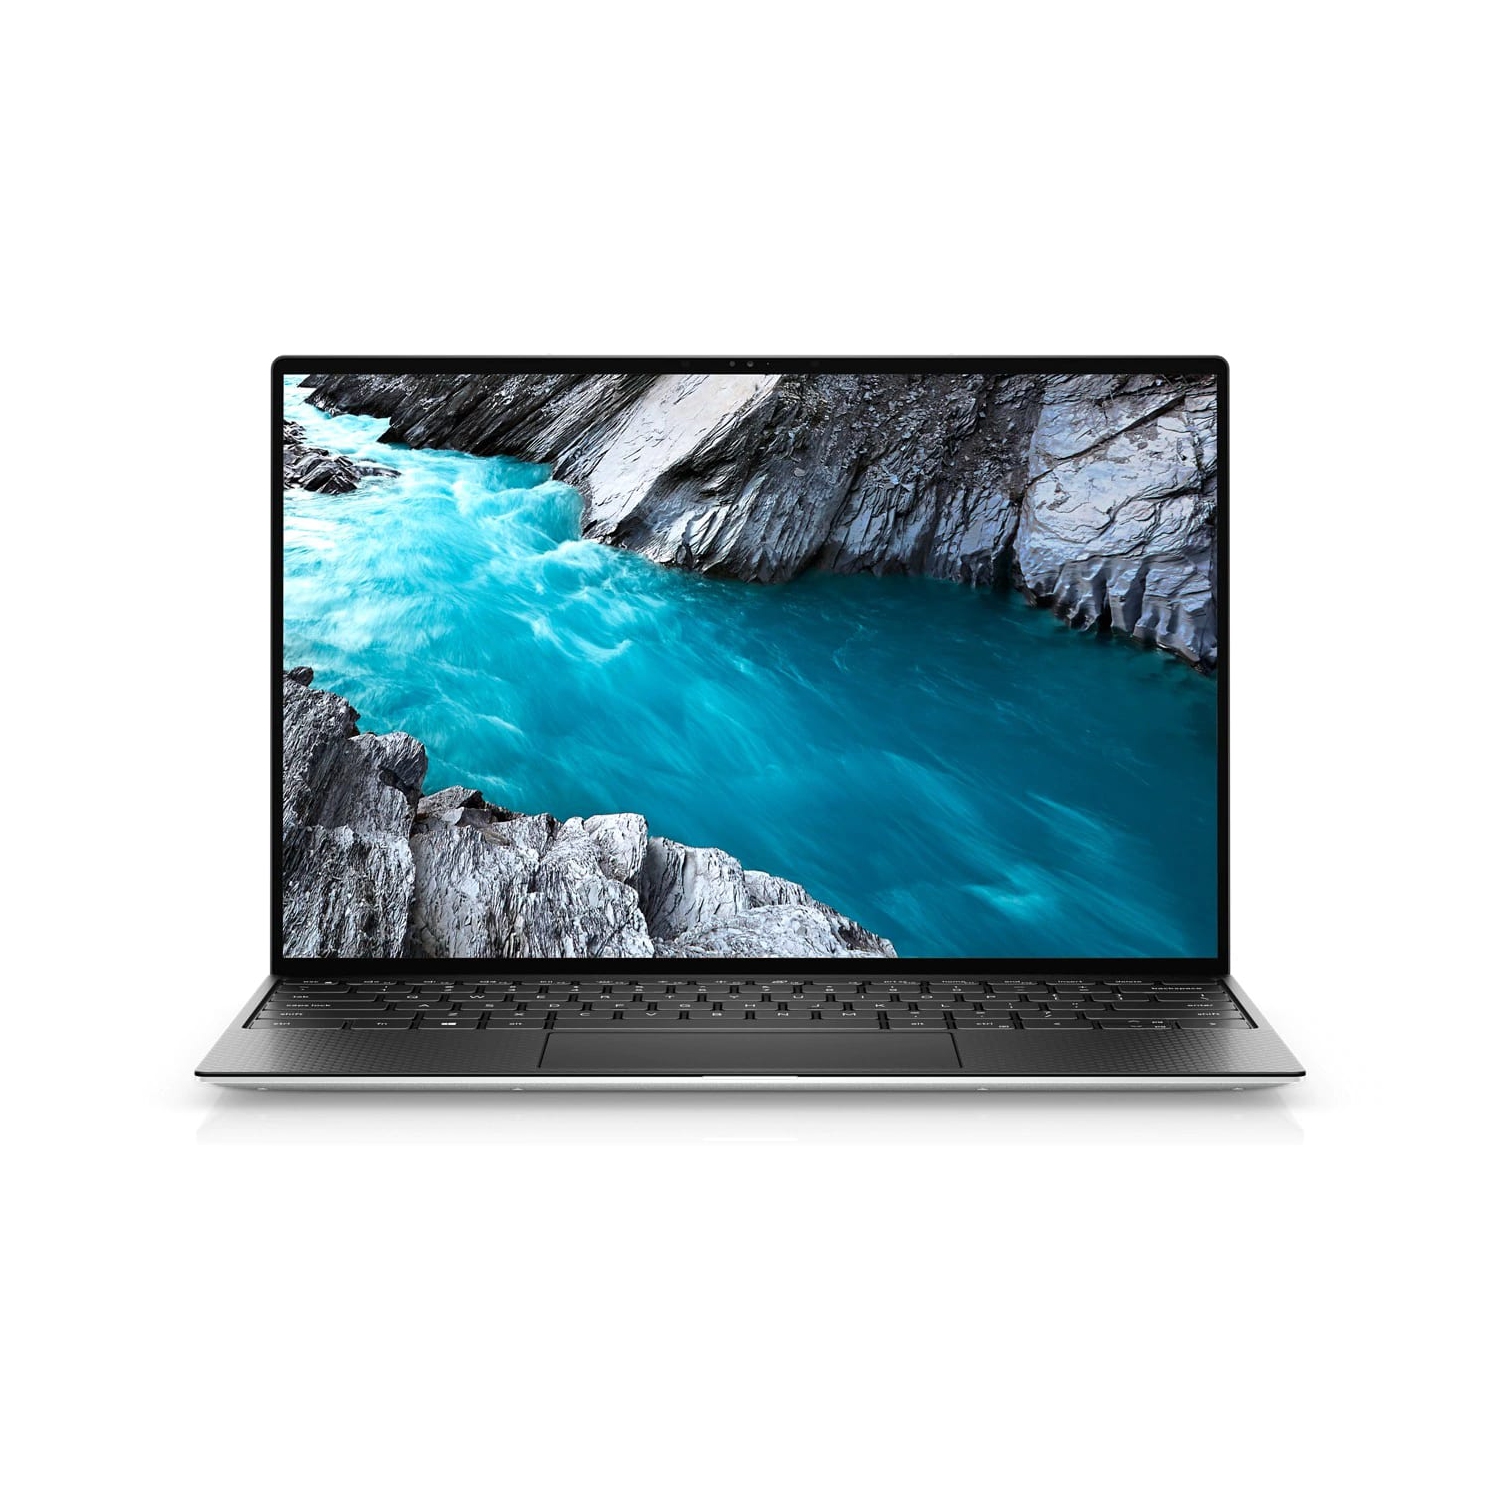 Refurbished (Excellent) - Dell XPS 13 9310 Laptop (2020) | 13.4" FHD+ | Core i5 - 512GB SSD - 8GB RAM | 4 Cores @ 4.2 GHz - 11th Gen CPU Certified Refurbished